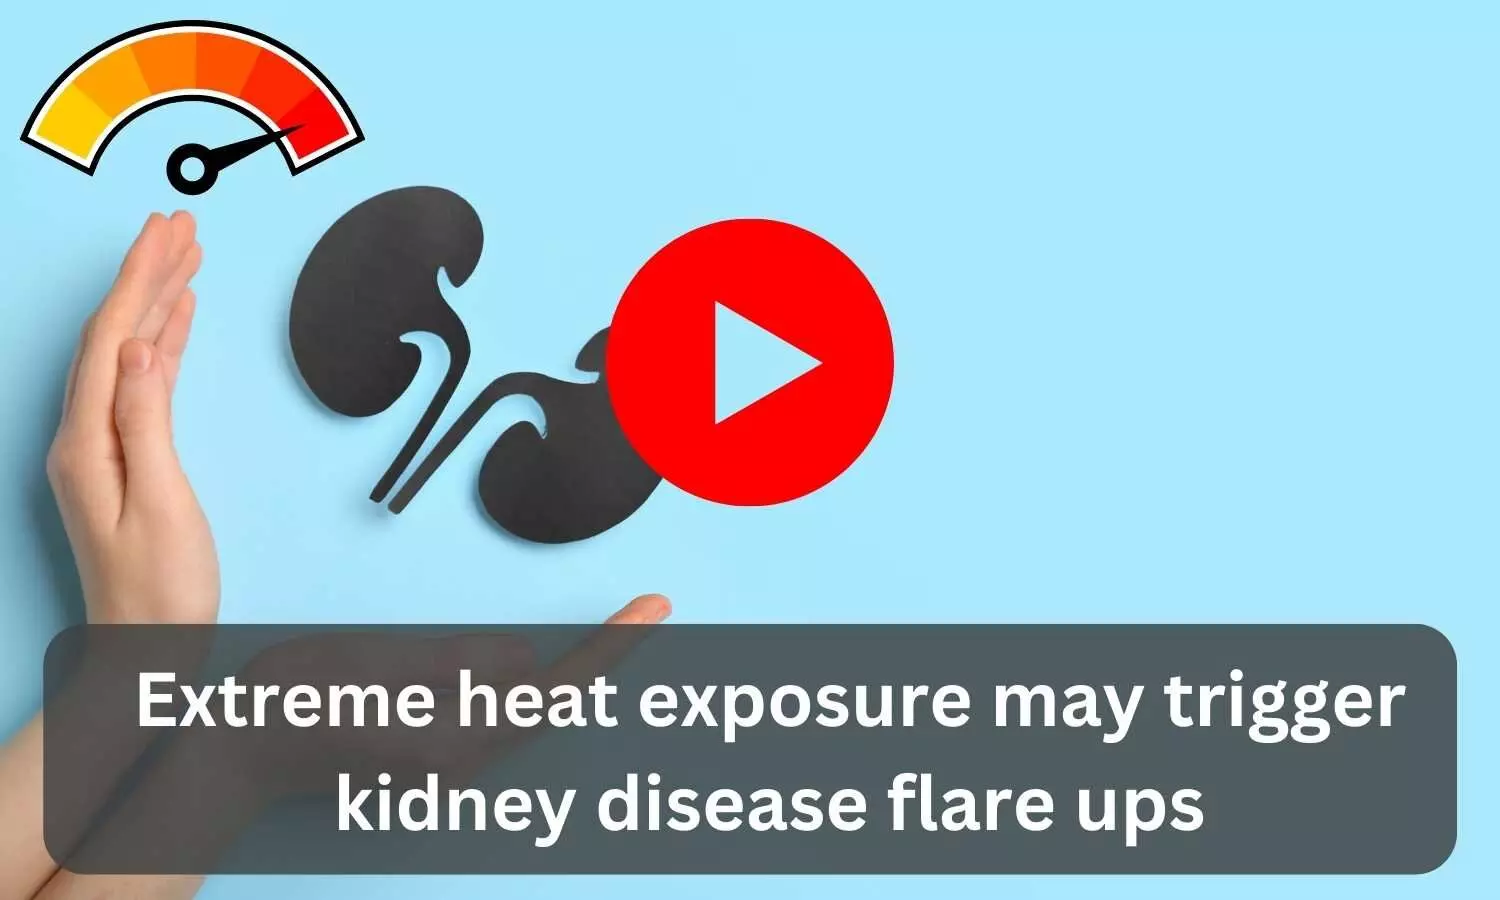 Extreme heat exposure may trigger kidney disease flare ups